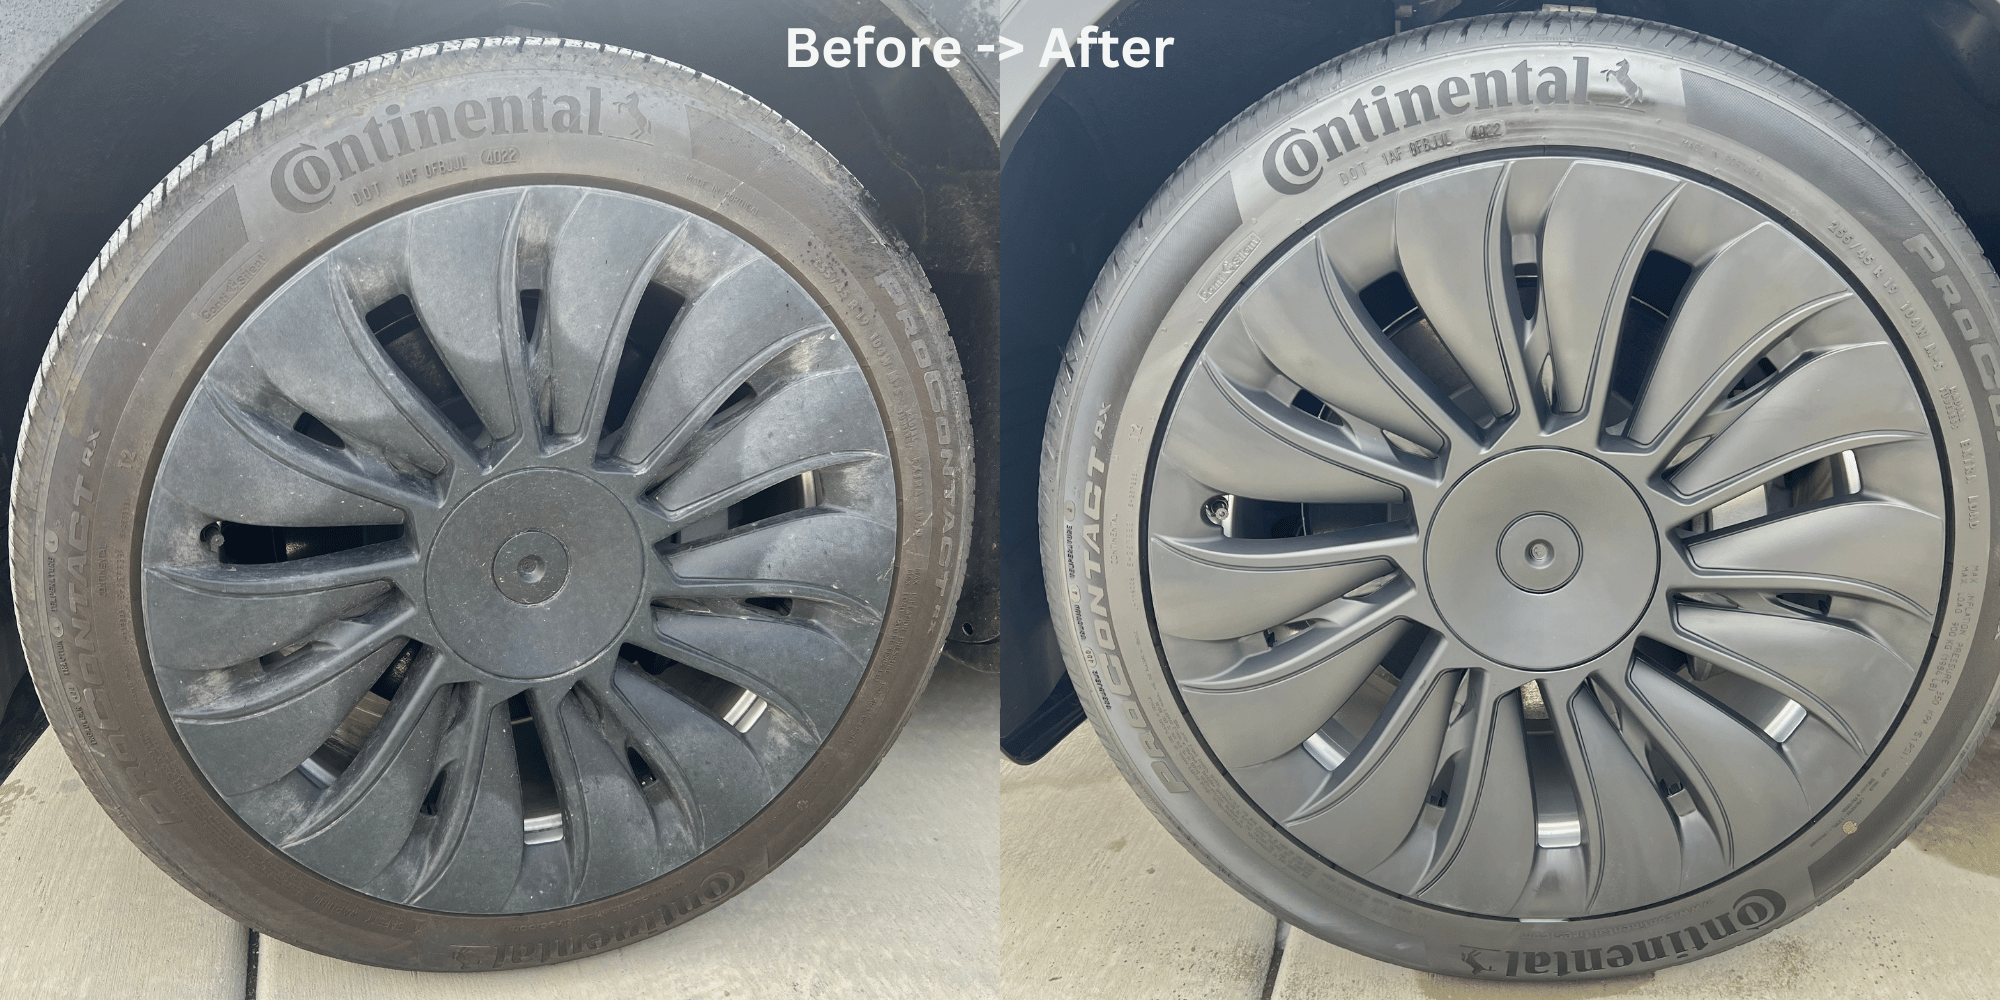 Ceramic Coating What to expect? — Electric Mobile Detailing